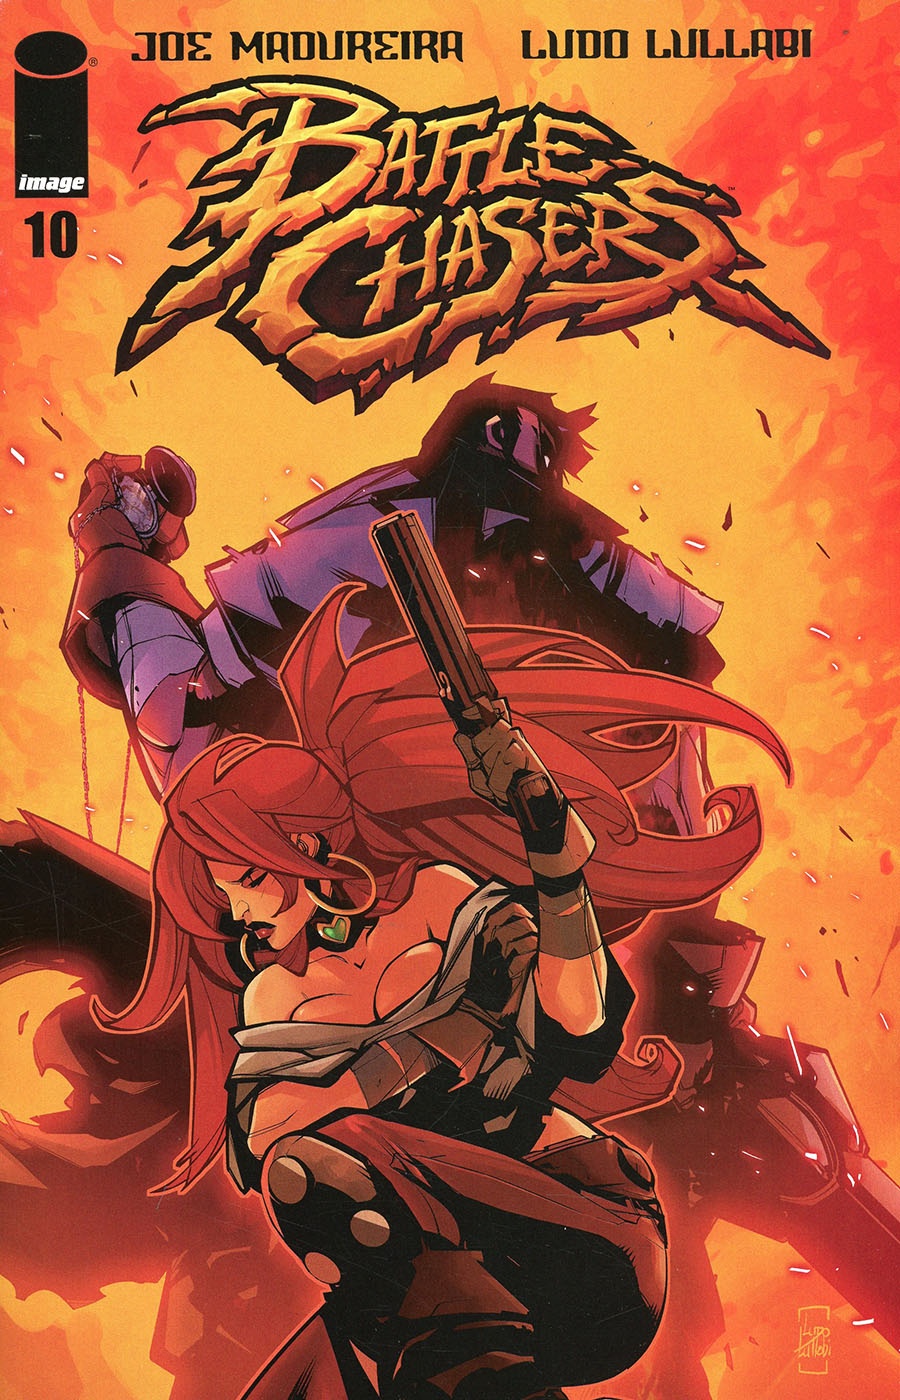 Battle Chasers #10 Cover A Regular Ludo Lullabi Cover (Limit 1 Per Customer)